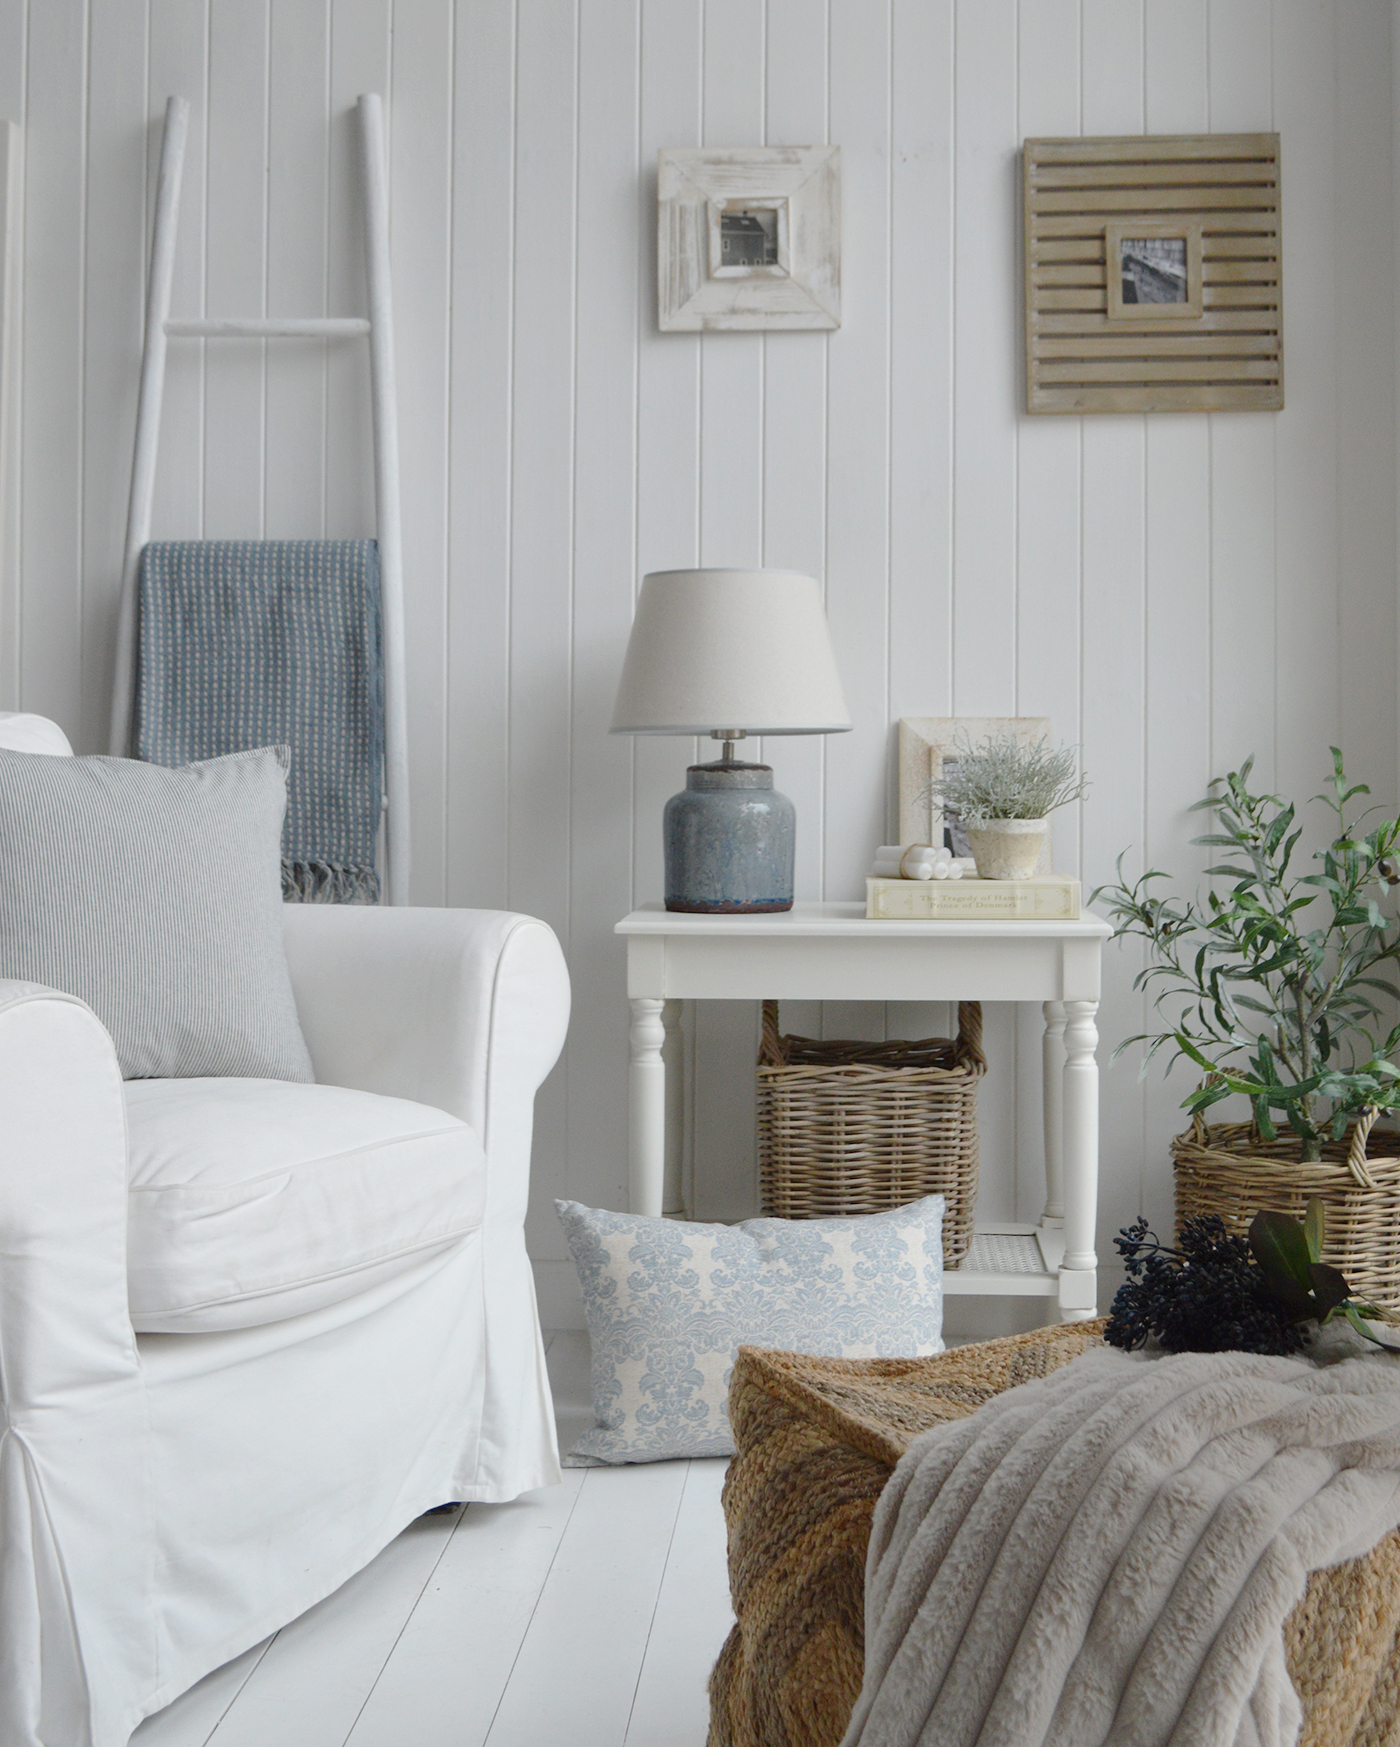 A relaxing coastal living room in blues and whites